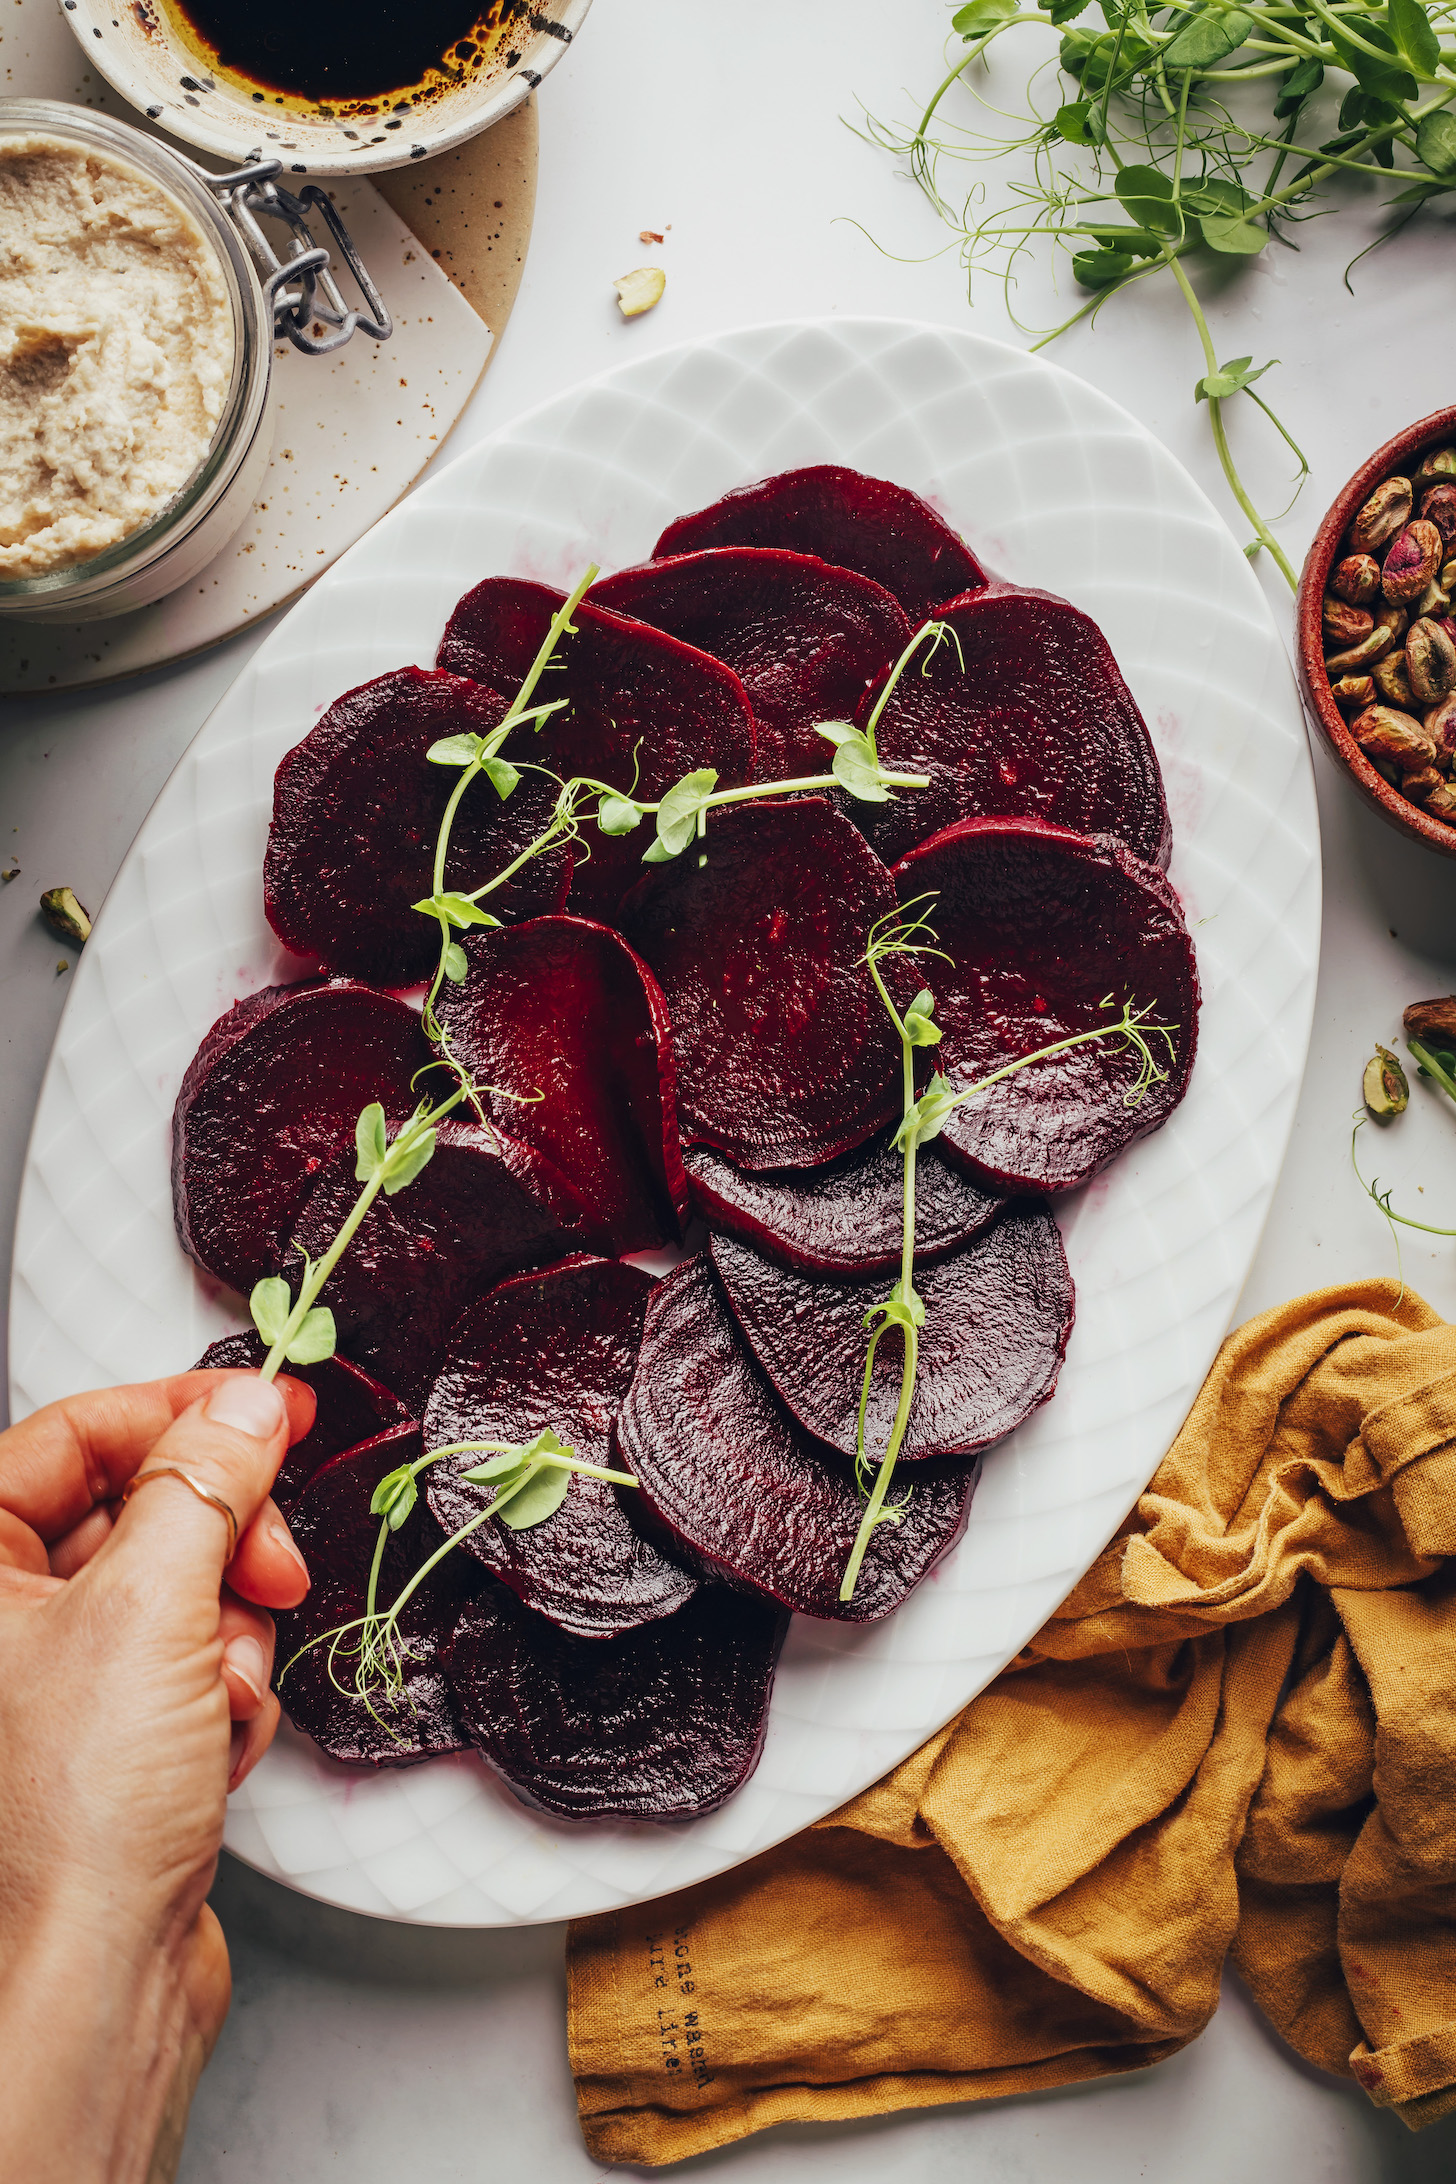 Placing pea shoots onto a platter of sliced roasted beets